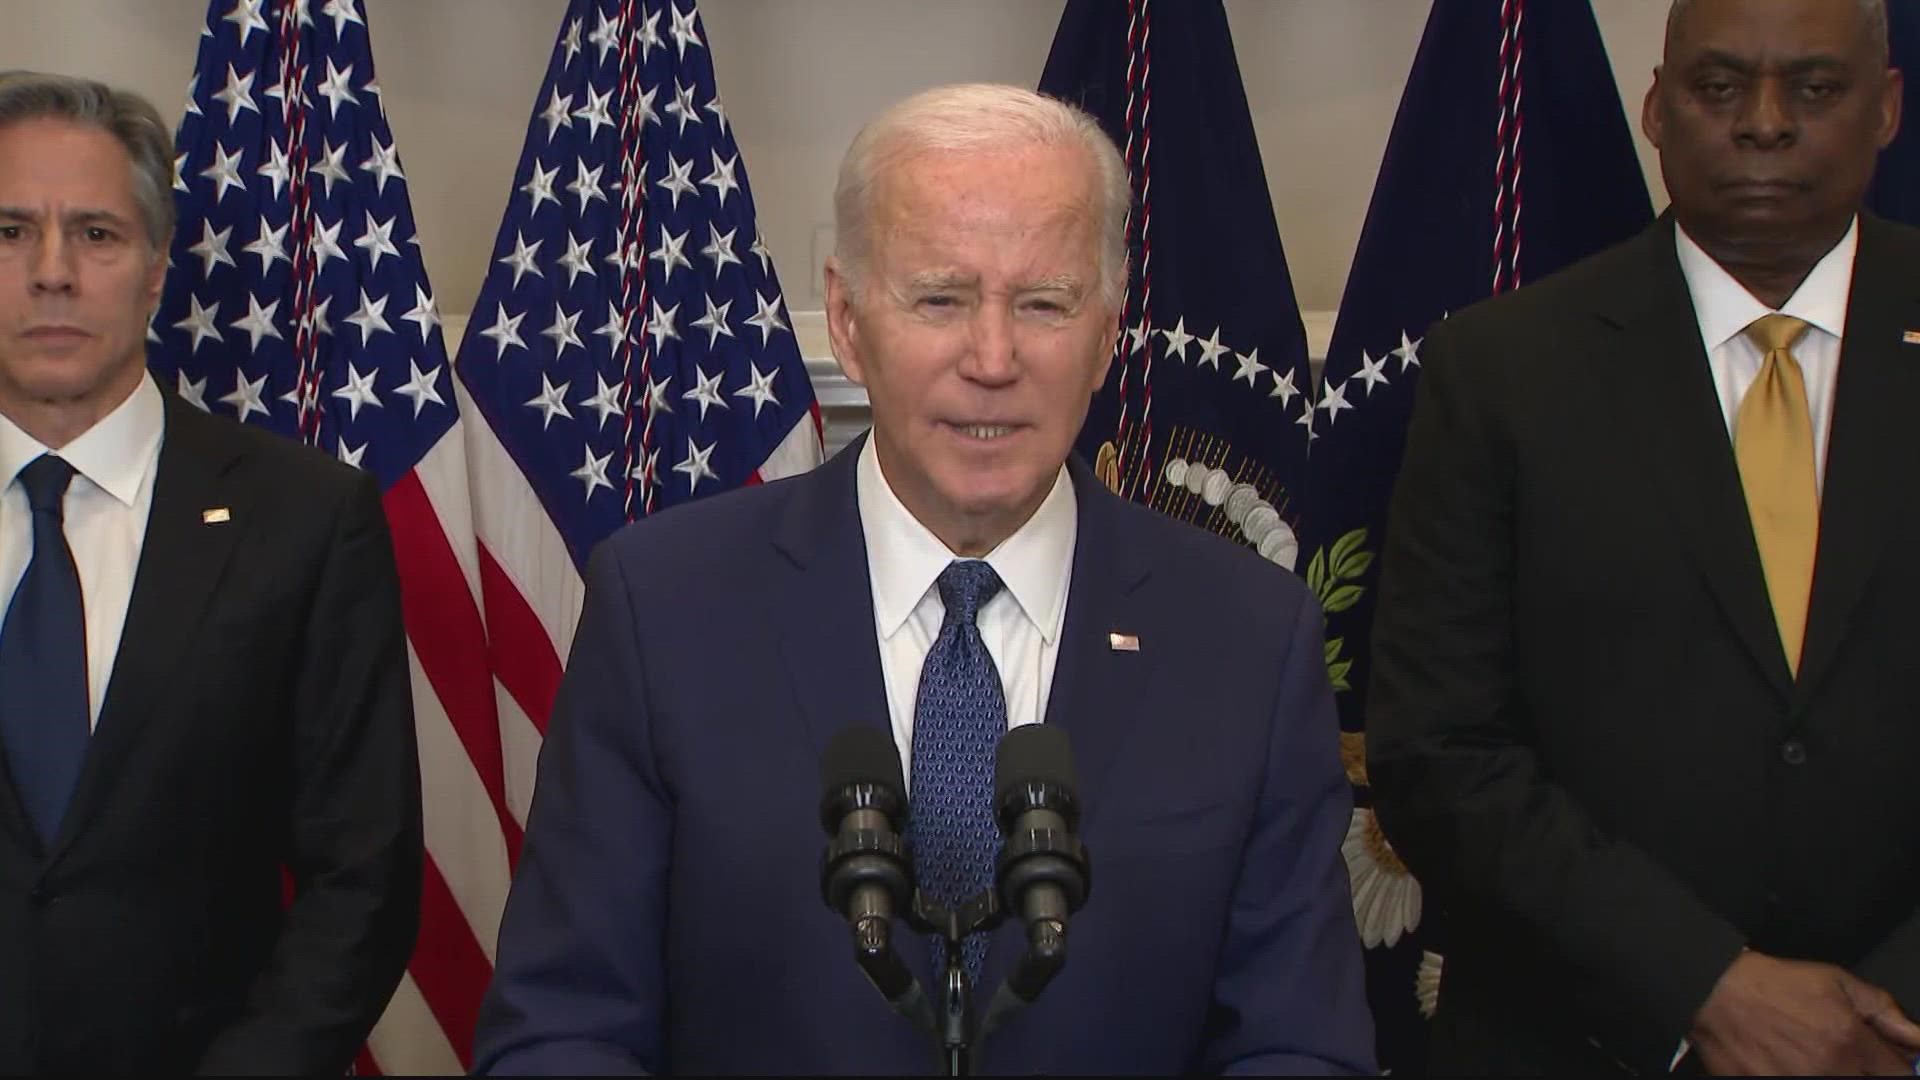 President Joe Biden says the US will send 31 tanks to Ukraine, escalating the conflict even further.